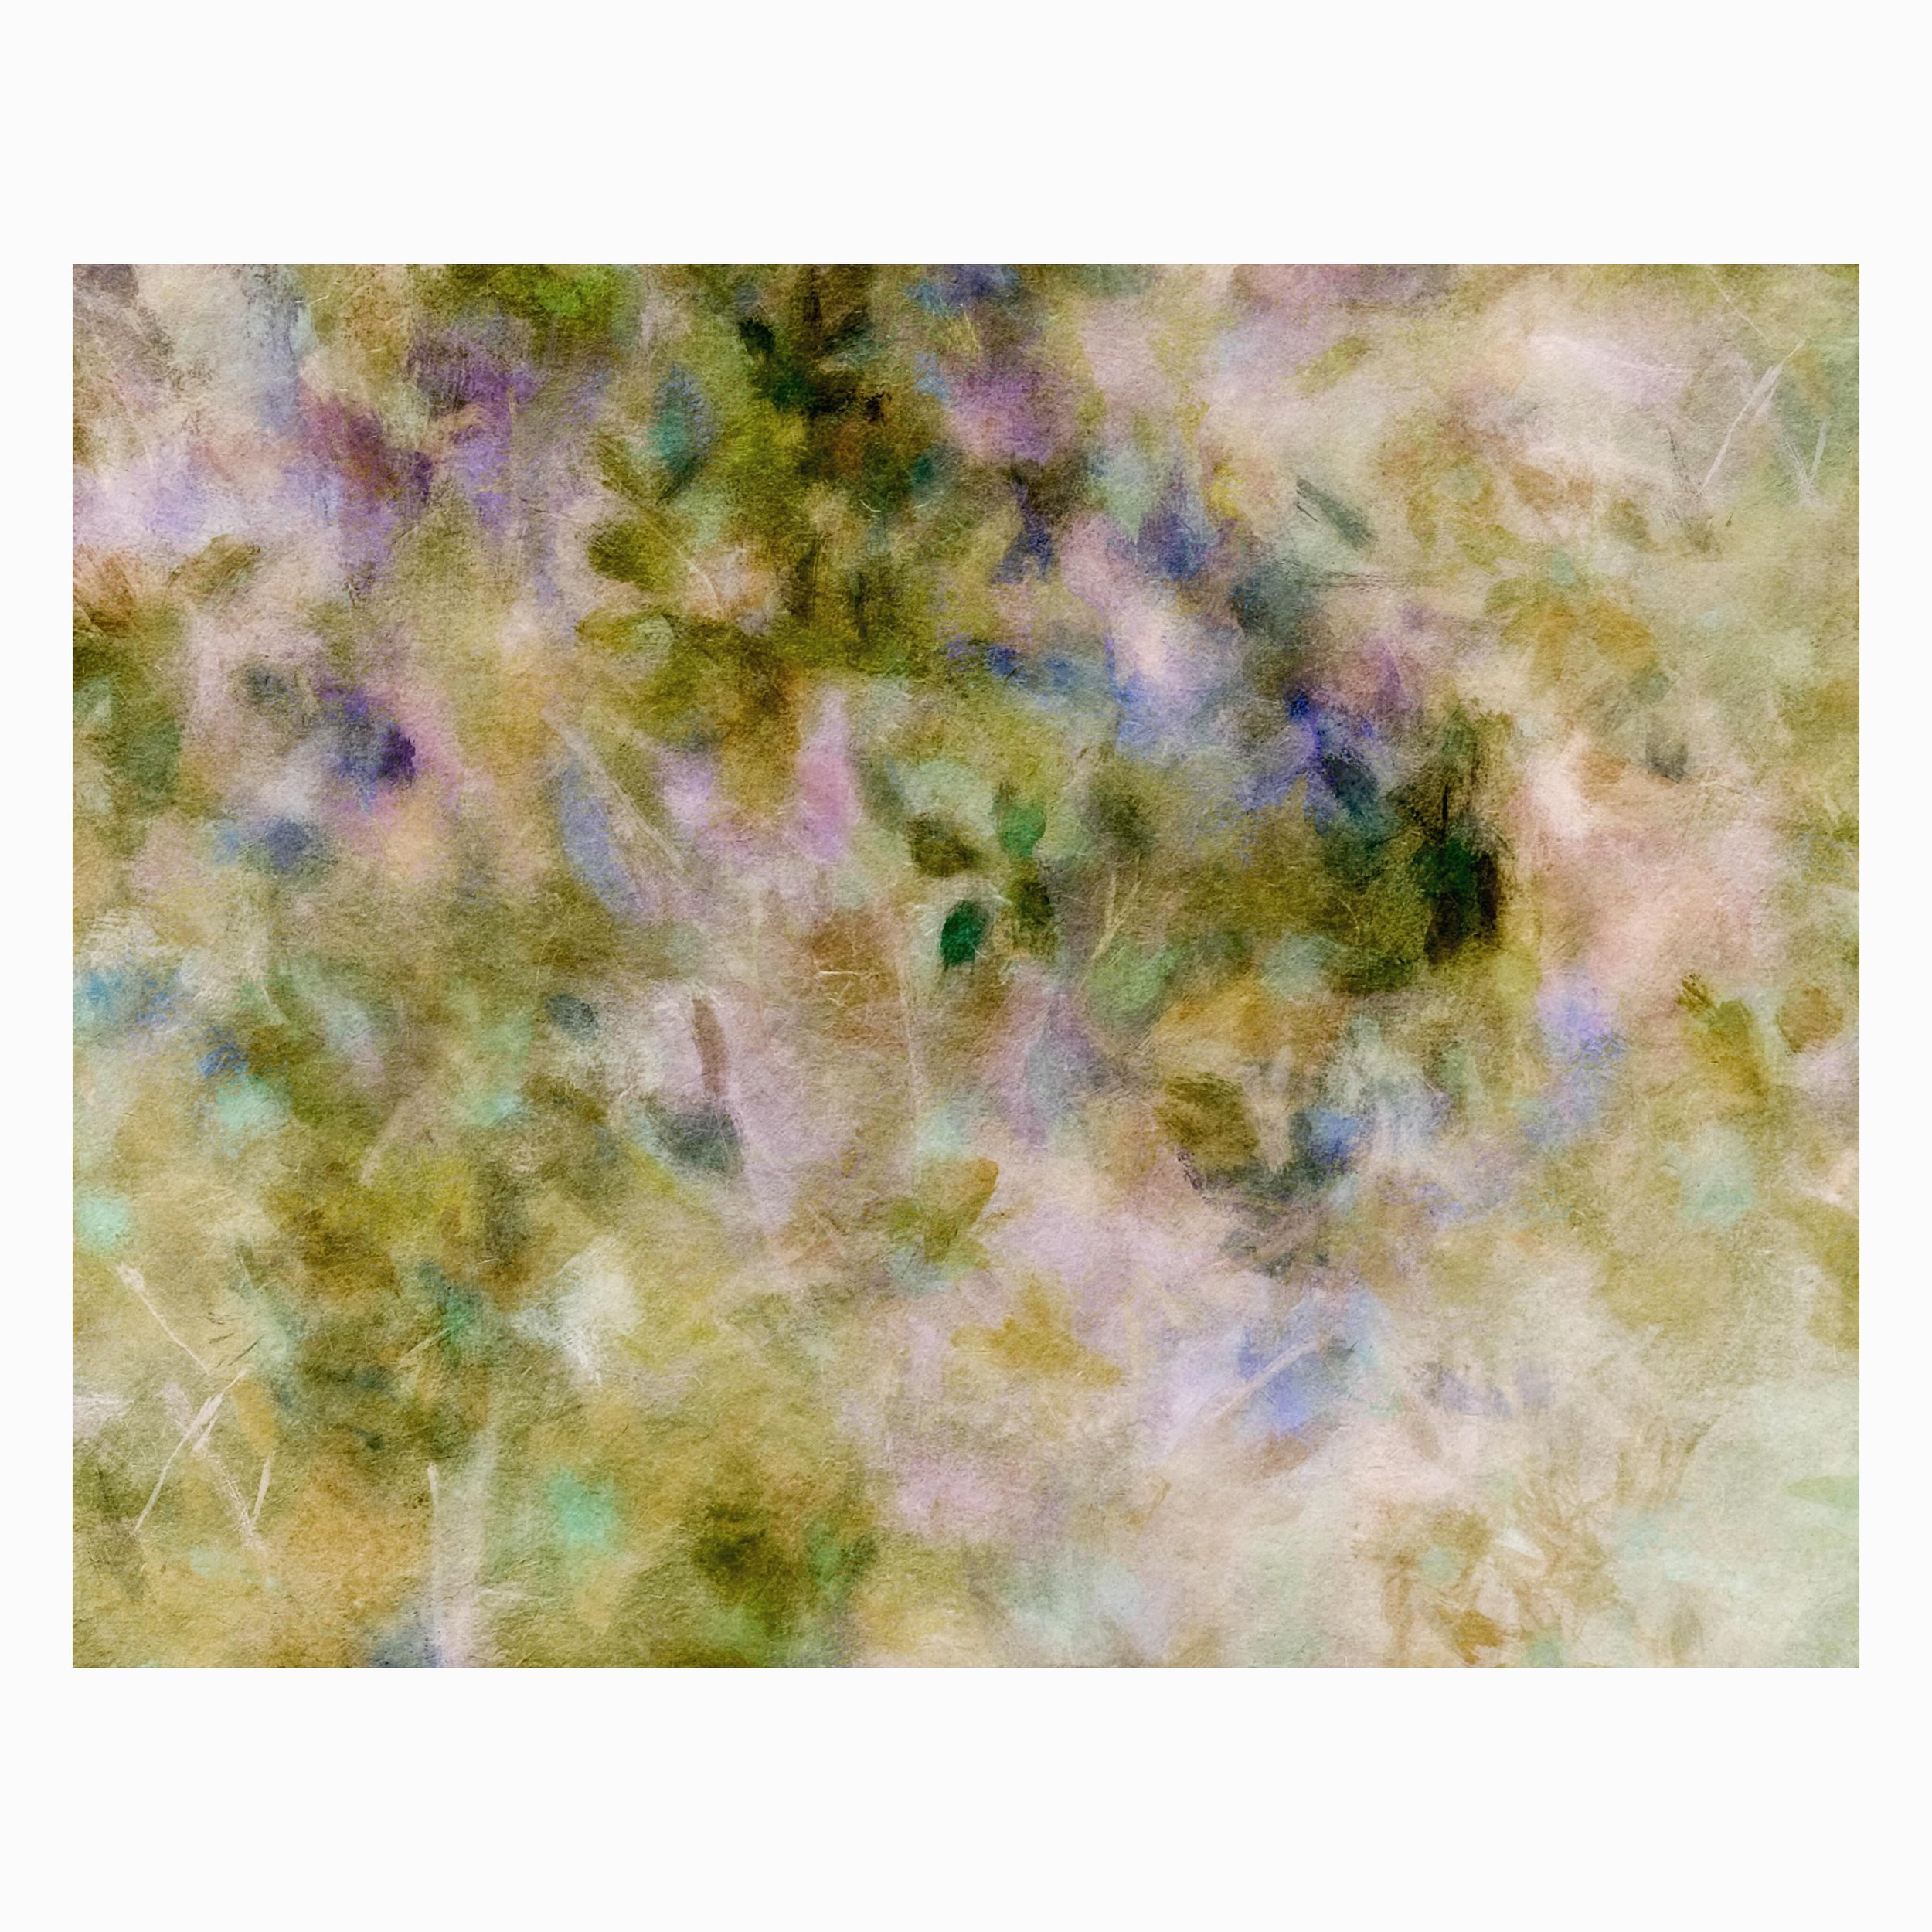 G l i m p s e
photo{painting}photo
#wip #painting #photography #floral
@westdeanfineart #westdeancollege